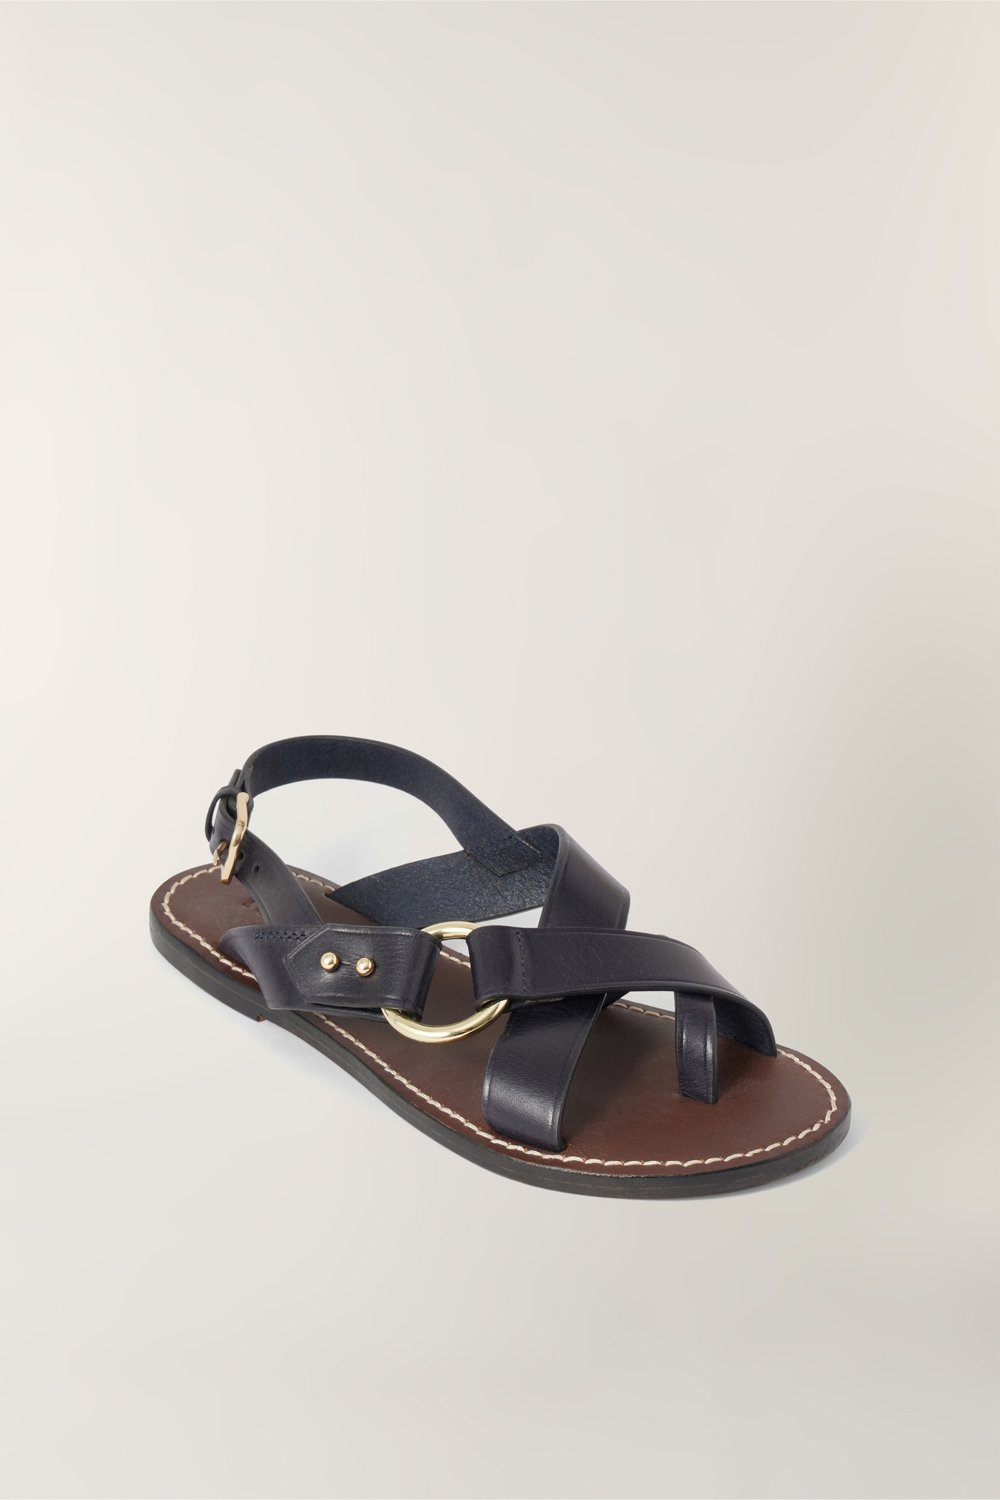 FLORENCE SANDALS